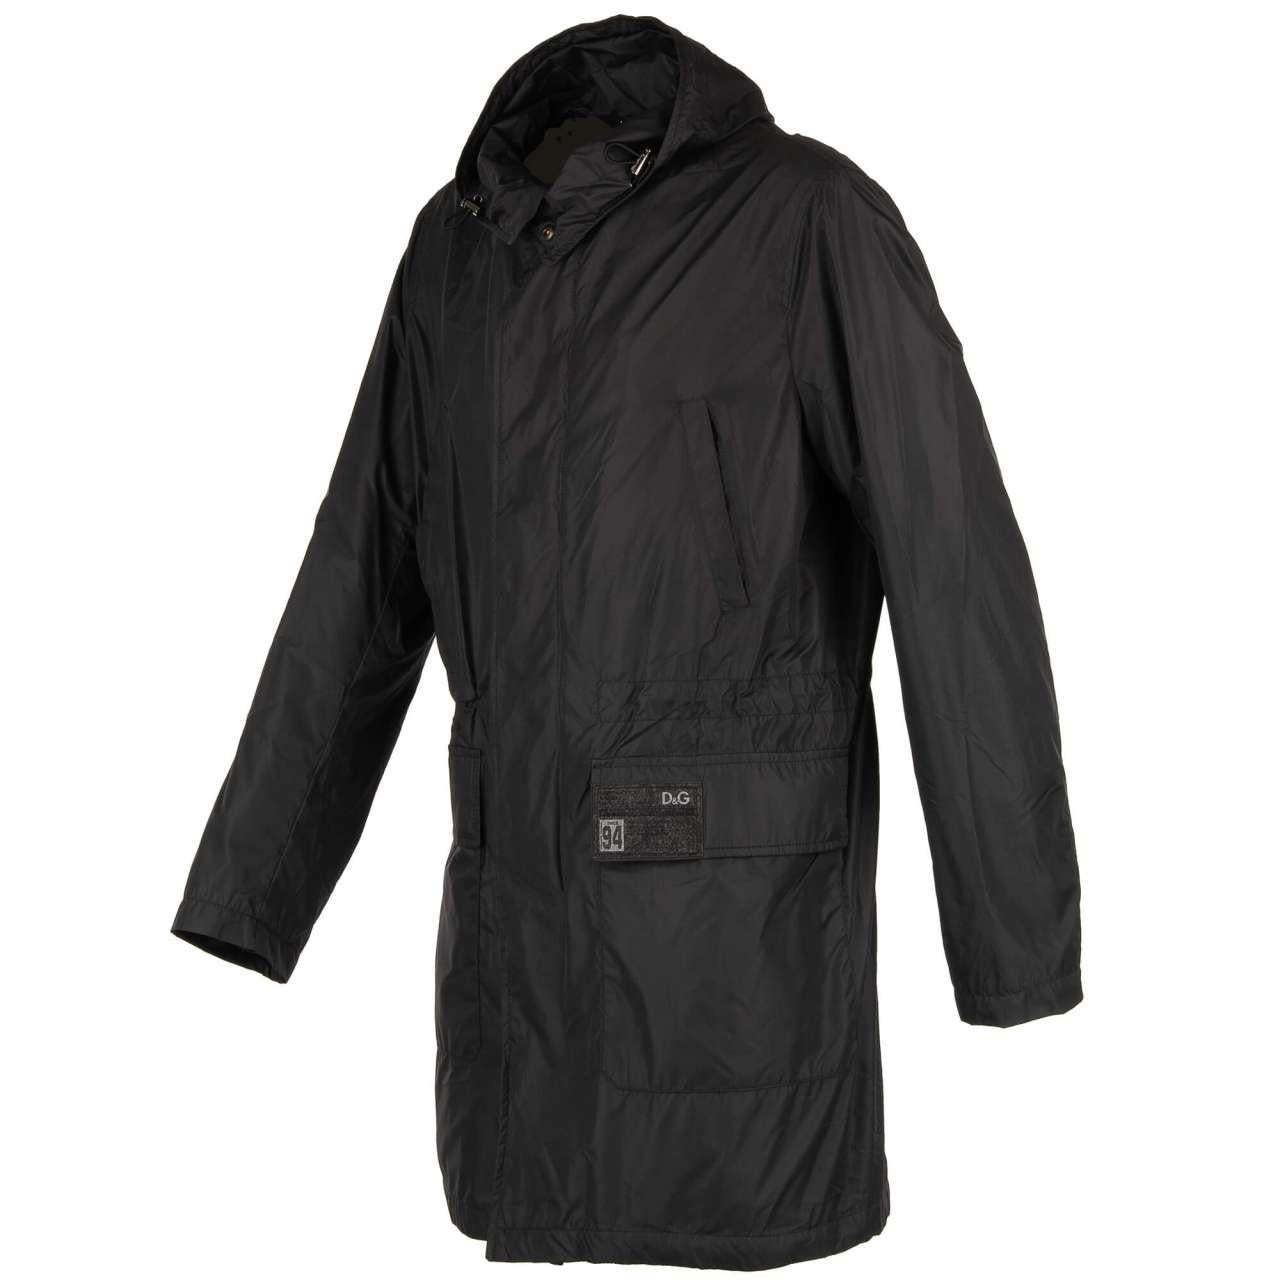 Dolce & Gabbana Light Hooded Rain Parka Jacket with Pockets and Logo Black 50 In Excellent Condition For Sale In Erkrath, DE